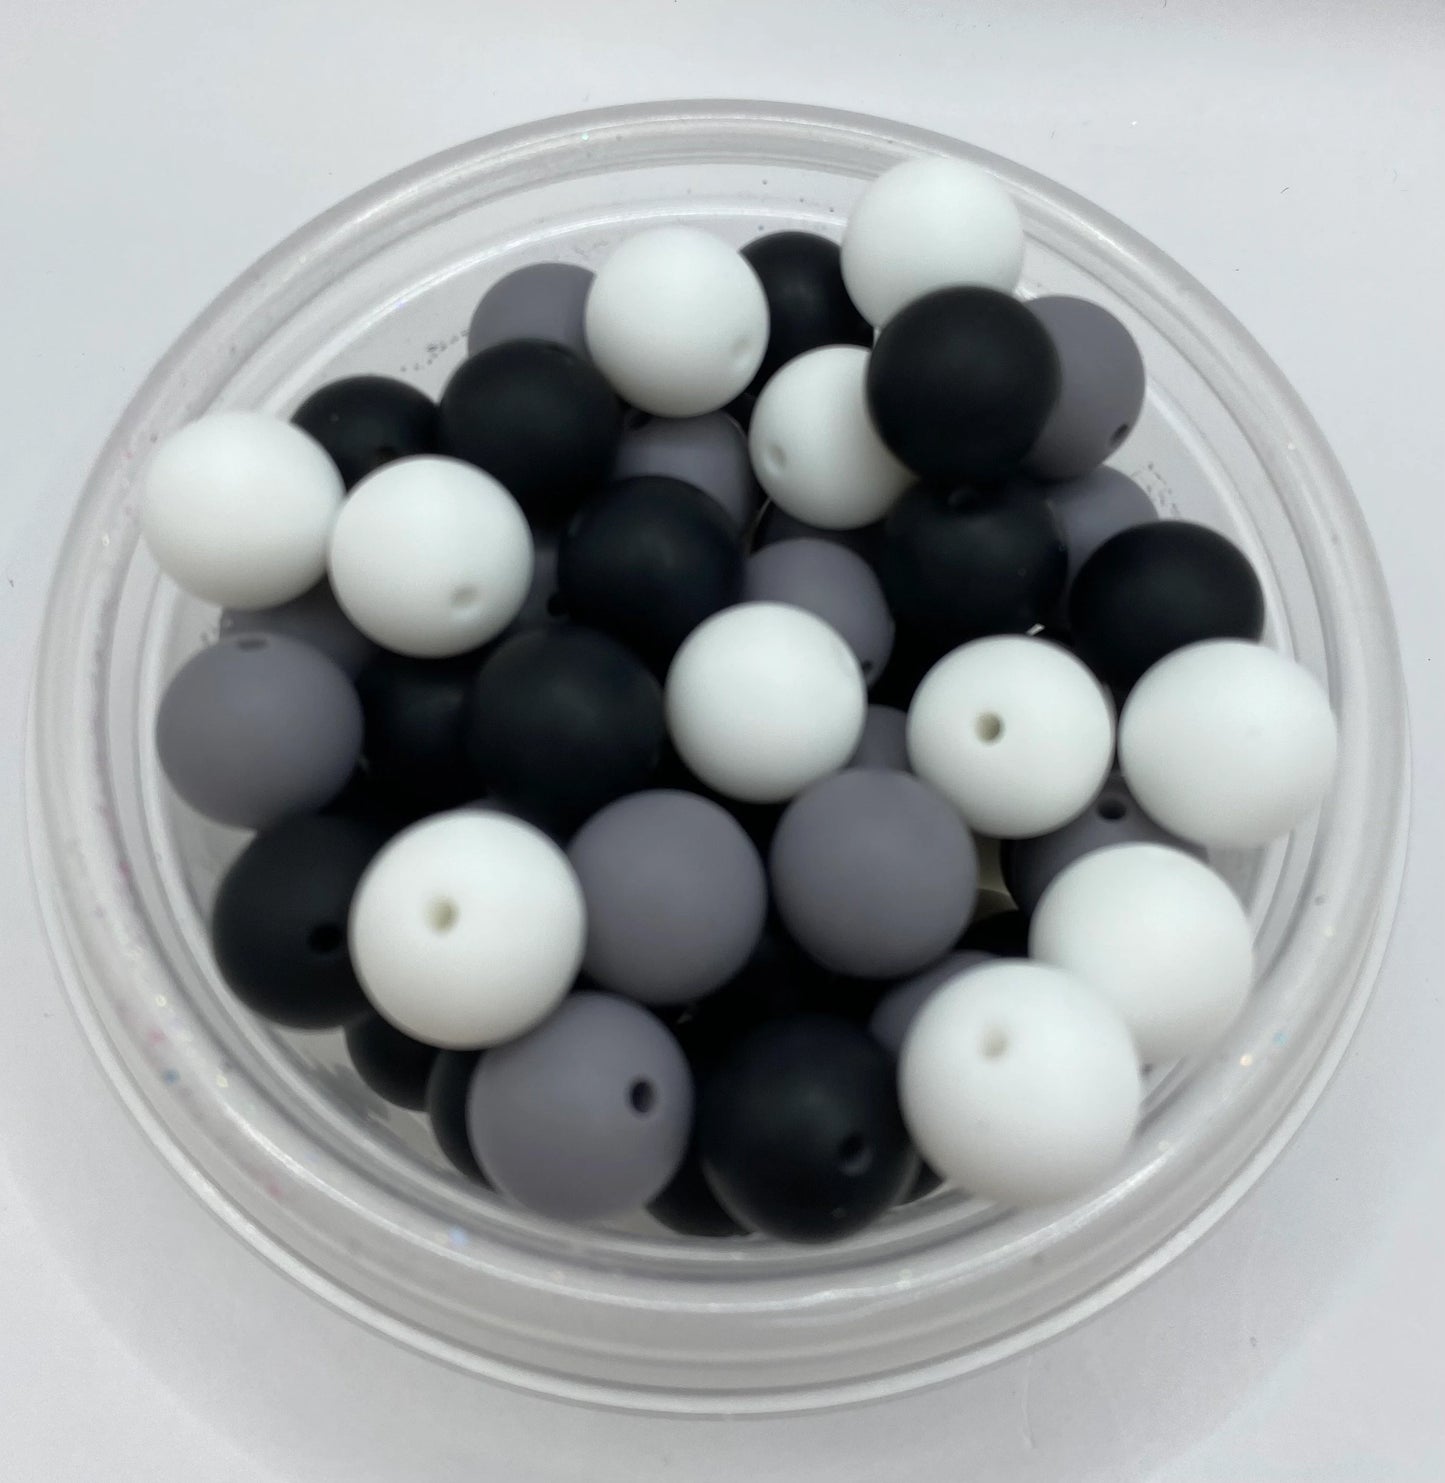 Black/Gray/White Bead Mix - Solid Round  Silicone Beads - 15mm - 50 Beads